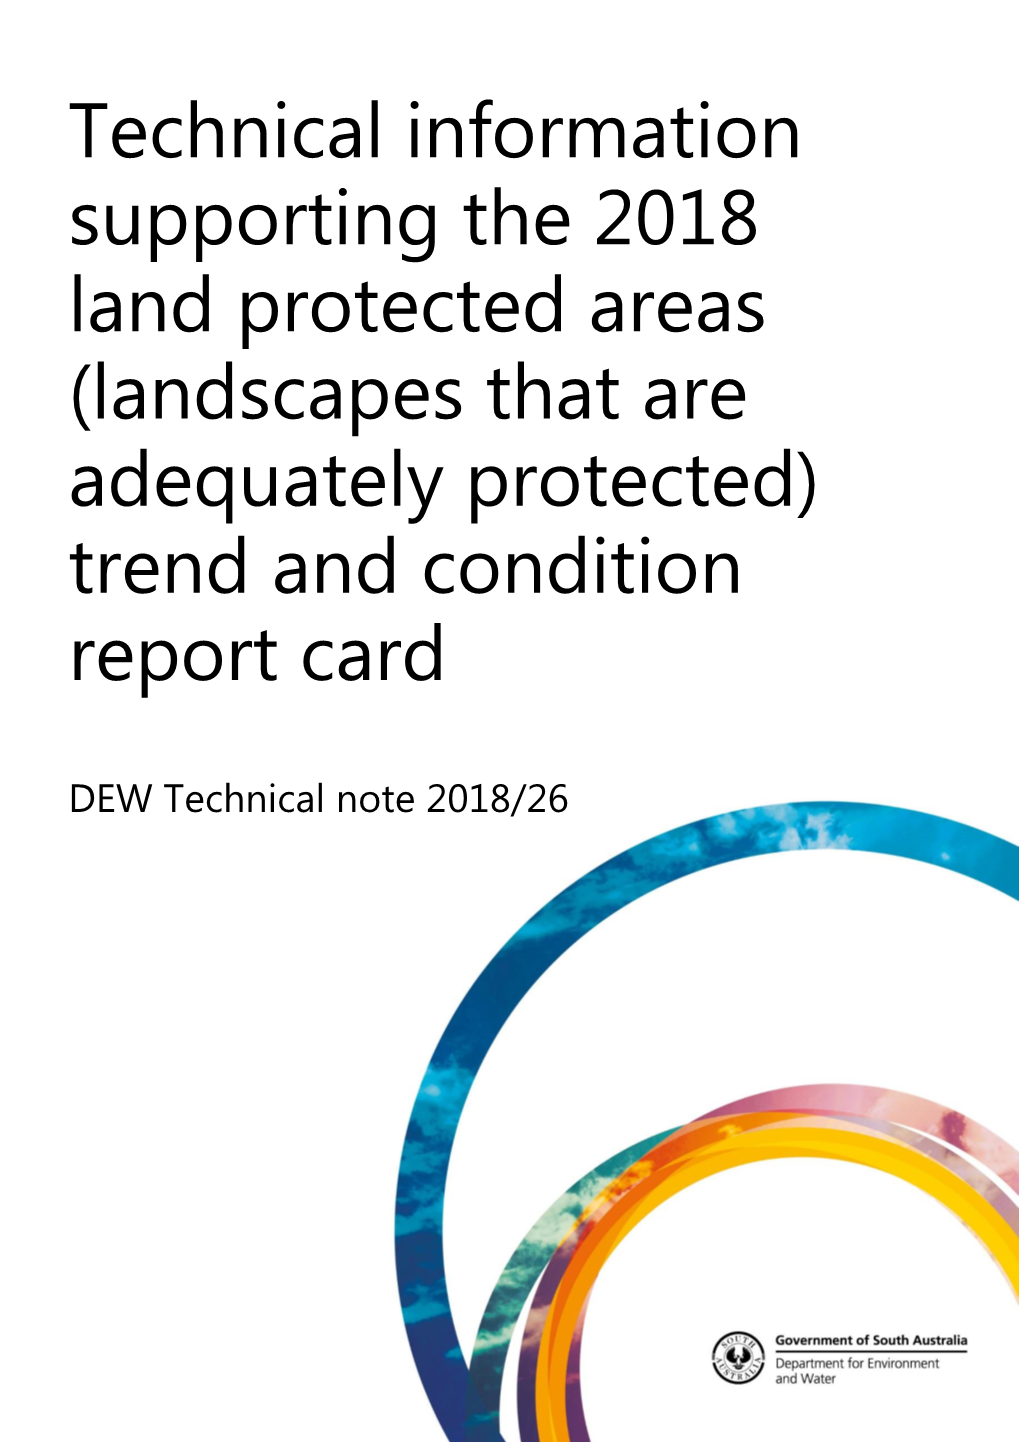 Technical Information Supporting the 2018 Land Protected Areas (Landscapes That Are Adequately Protected) Trend and Condition Report Card